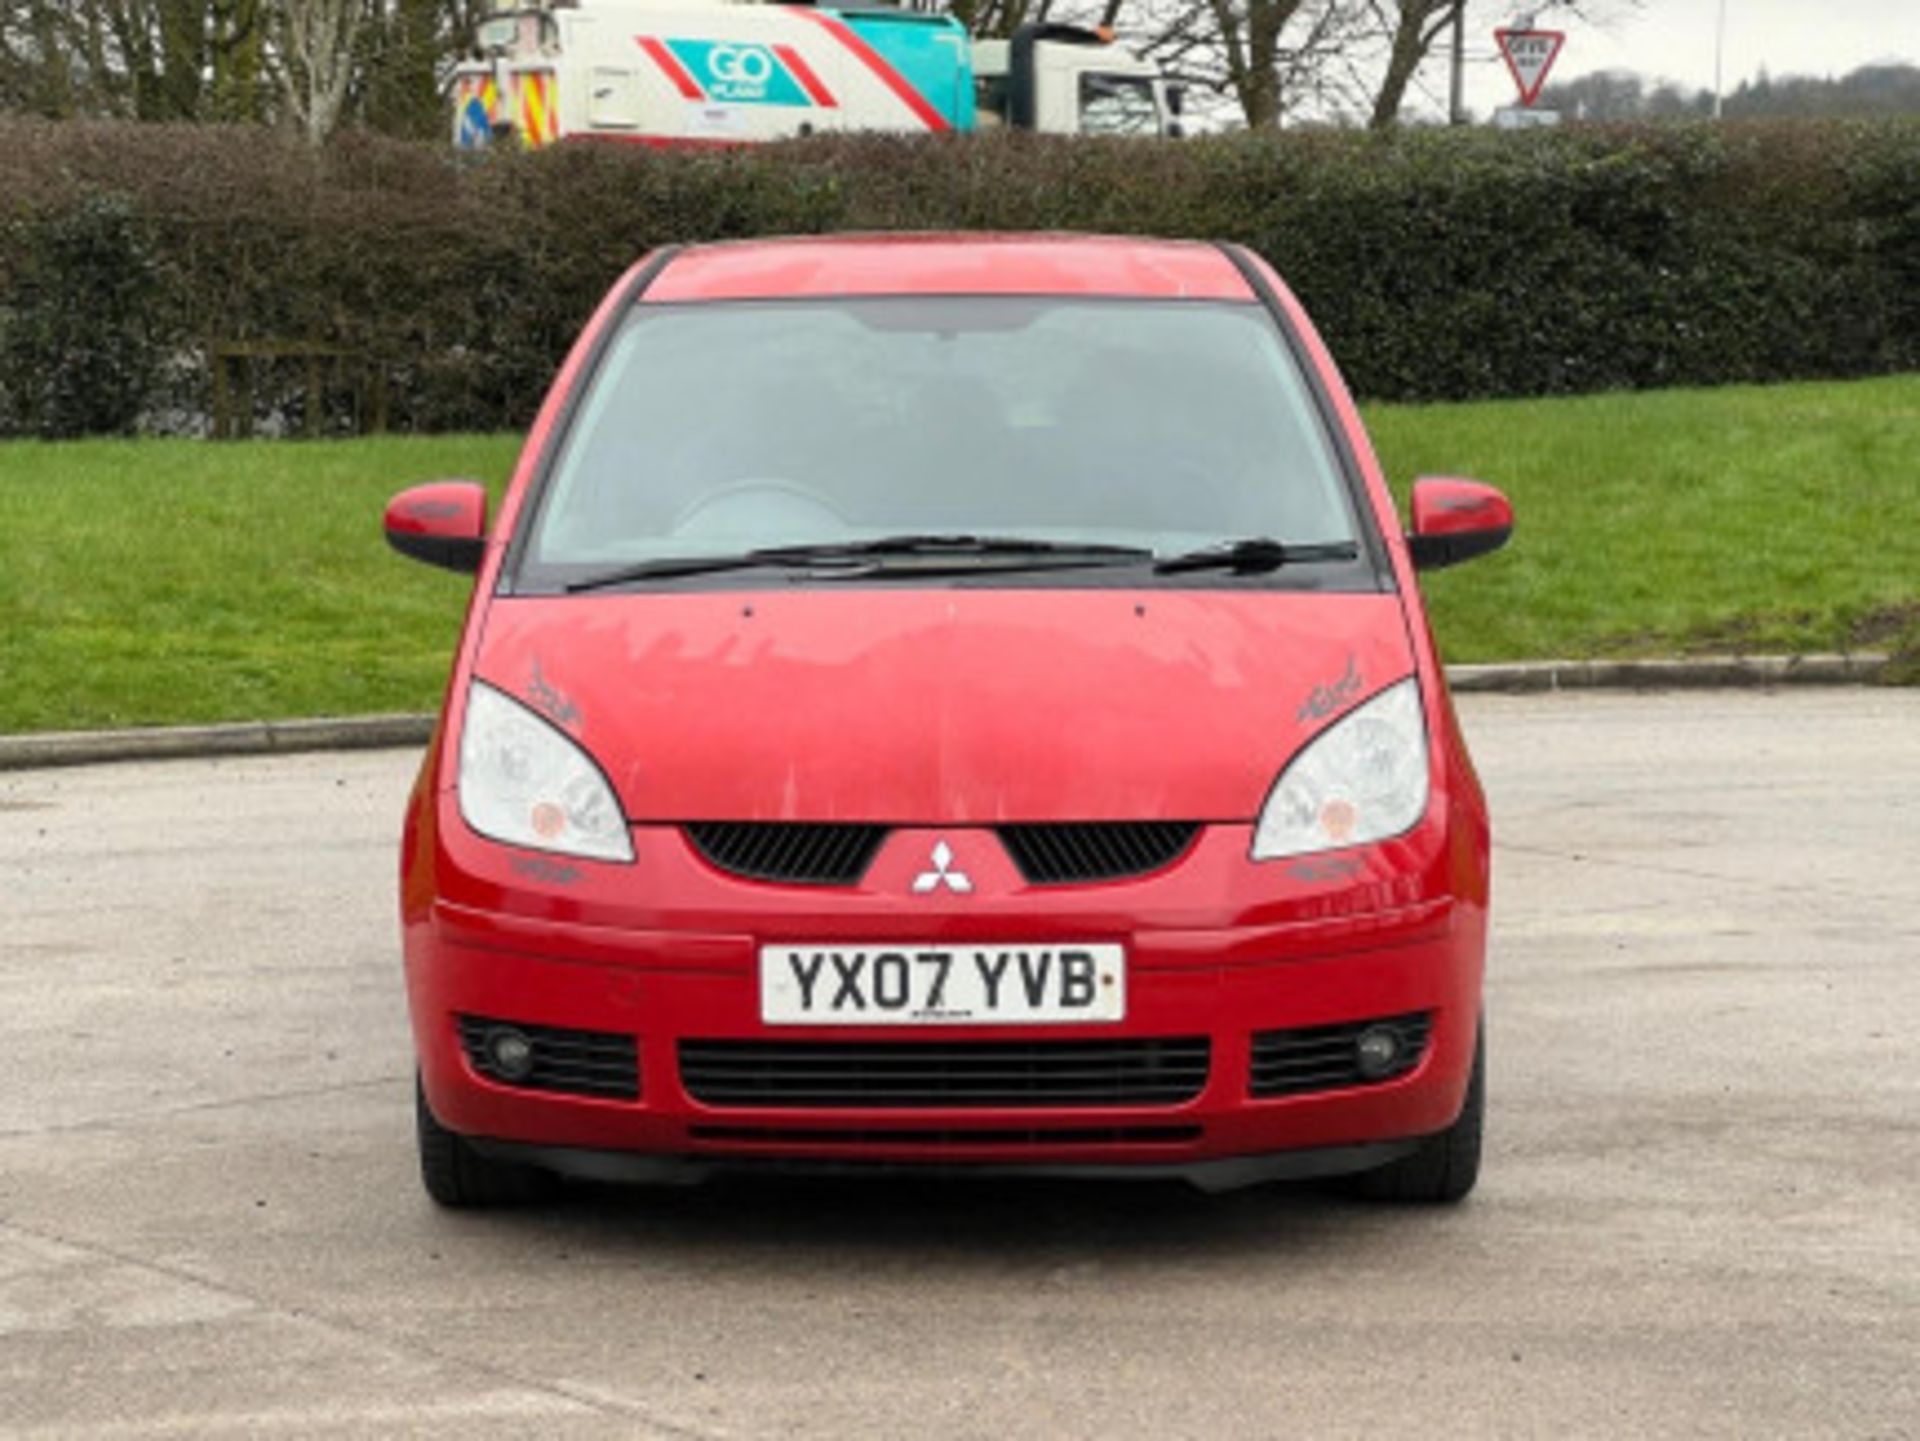 2007 MITSUBISHI COLT 1.5 DI-D DIESEL AUTOMATIC >>--NO VAT ON HAMMER--<< - Image 88 of 191